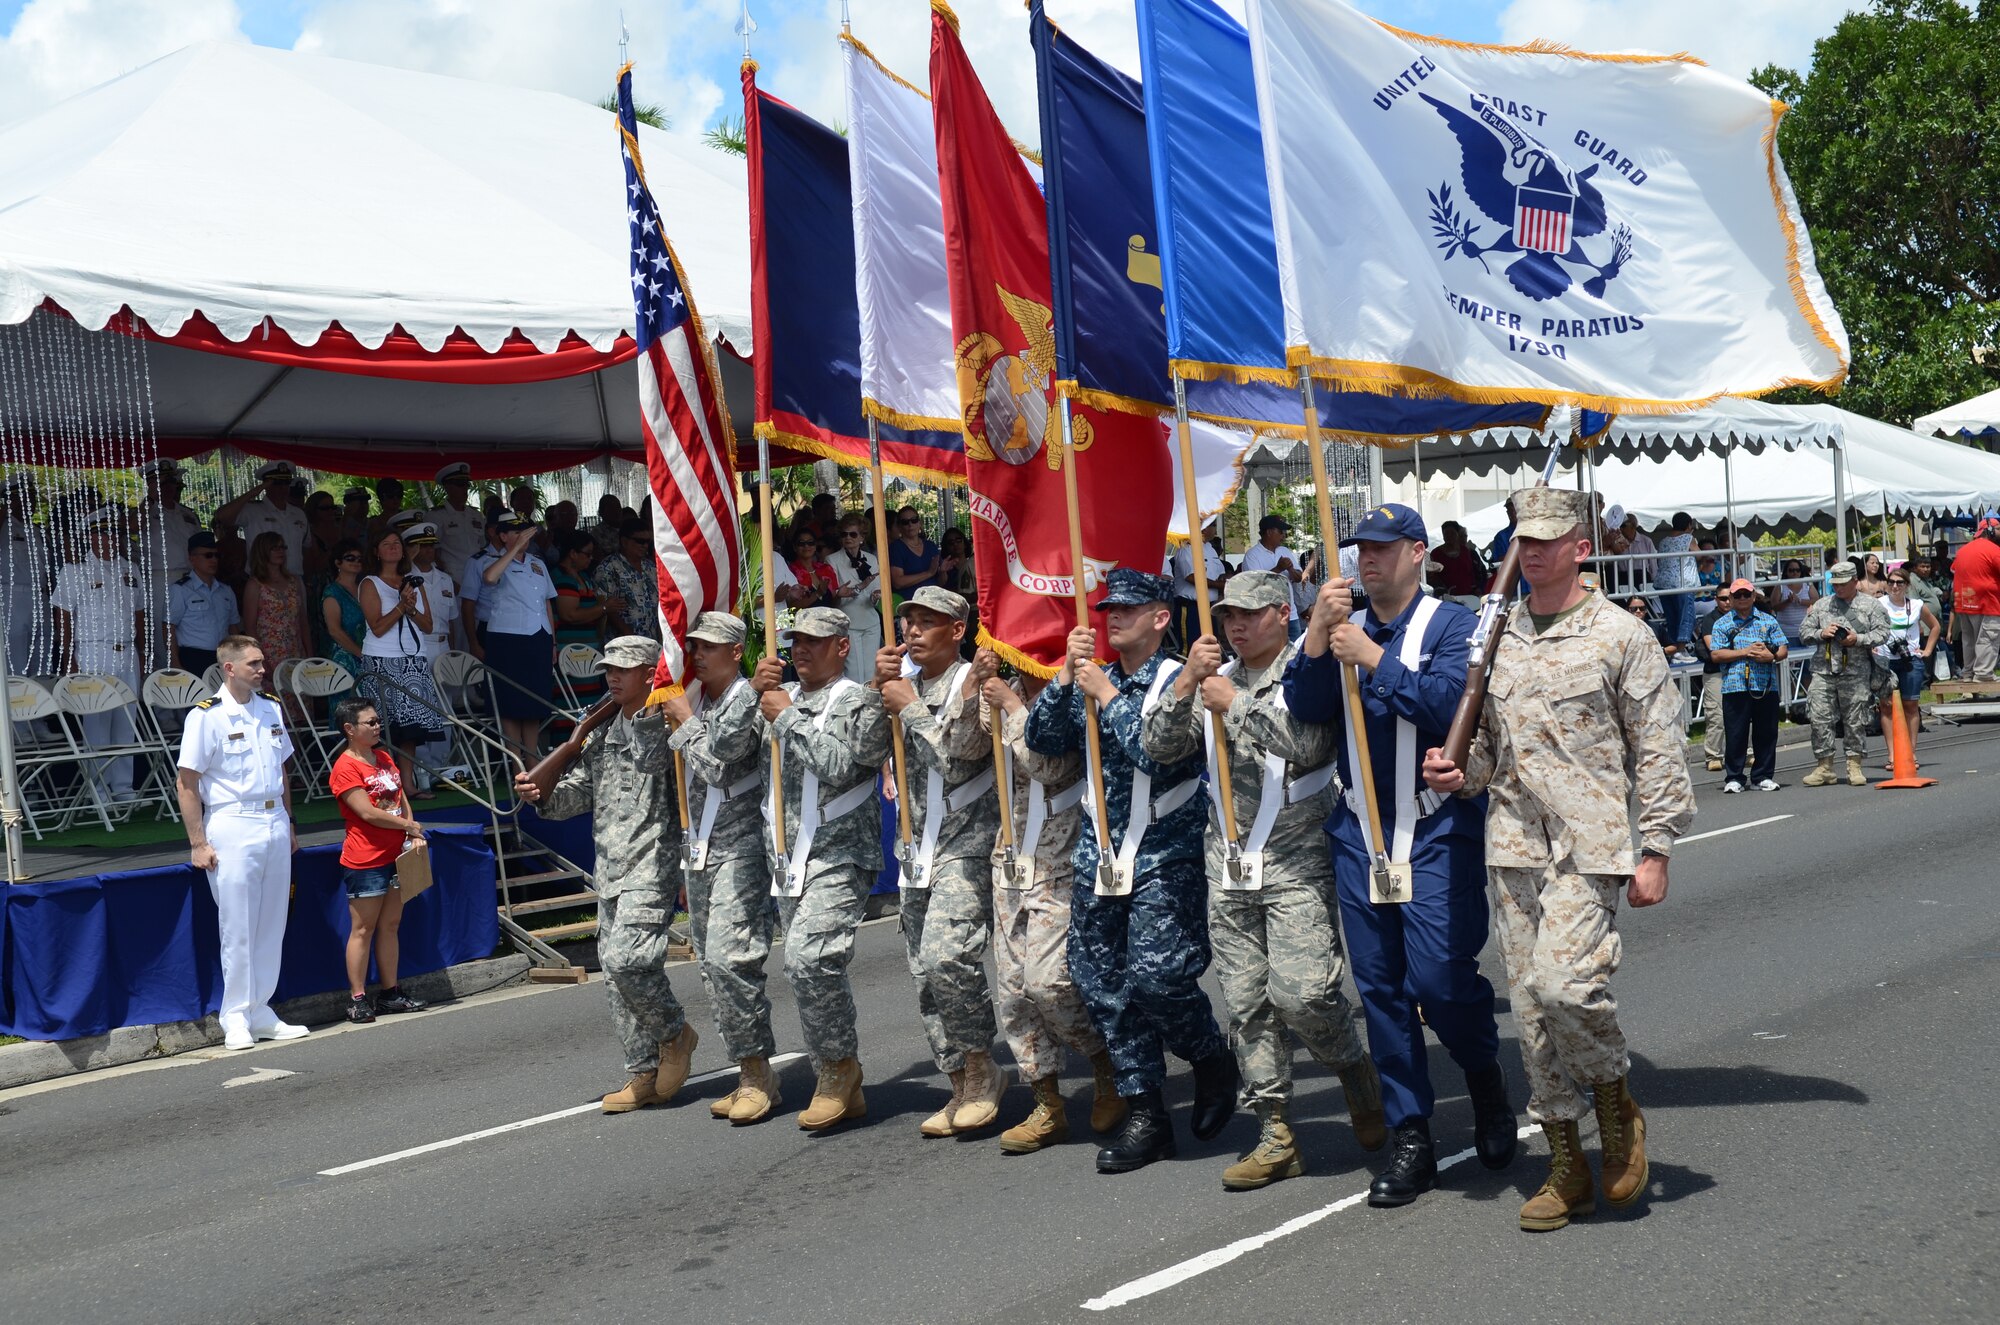 A joint color guard, comprised of service members from various guard and Reserve units stationed on the island, pass the 69th Guam Liberation Day parade grand stand in Hagåtña, Guam, July 21, 2013. Formations of active-duty service members, guardsmen and reservists, including more than 140 Airmen from the 36th Wing, led the parade down the 1.2-mile route past thousands of spectators. The parade commemorated the United States freeing the island from imperial Japan’s control during the Second Battle of Guam, which began July 21, 1944, and lasted 21 days. (U.S. Air Force photo by Staff Sgt. Brok McCarthy/Released)